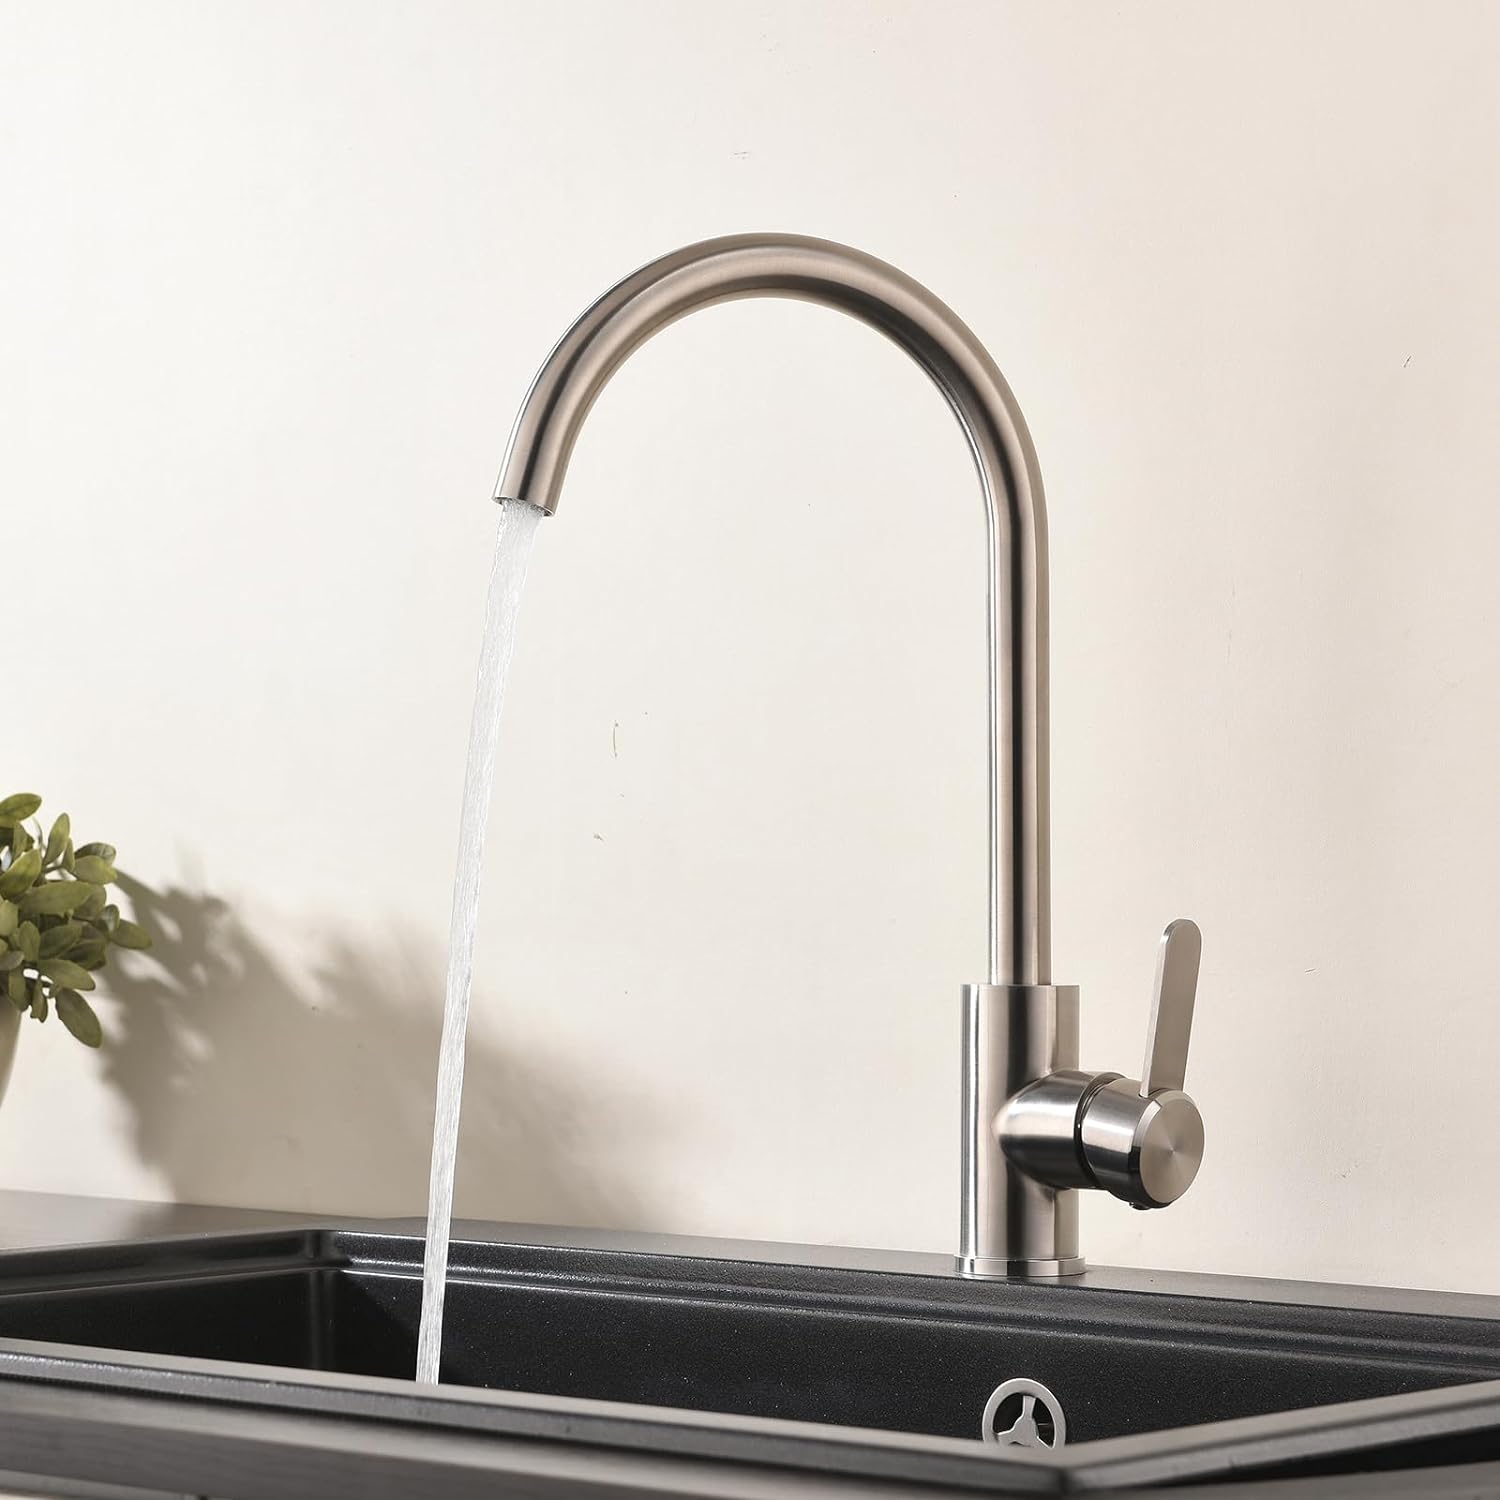 B Backline 304 SS Single Lever Kitchen Sink Faucet Tap 360° Rotatable (Brshed Nickle)